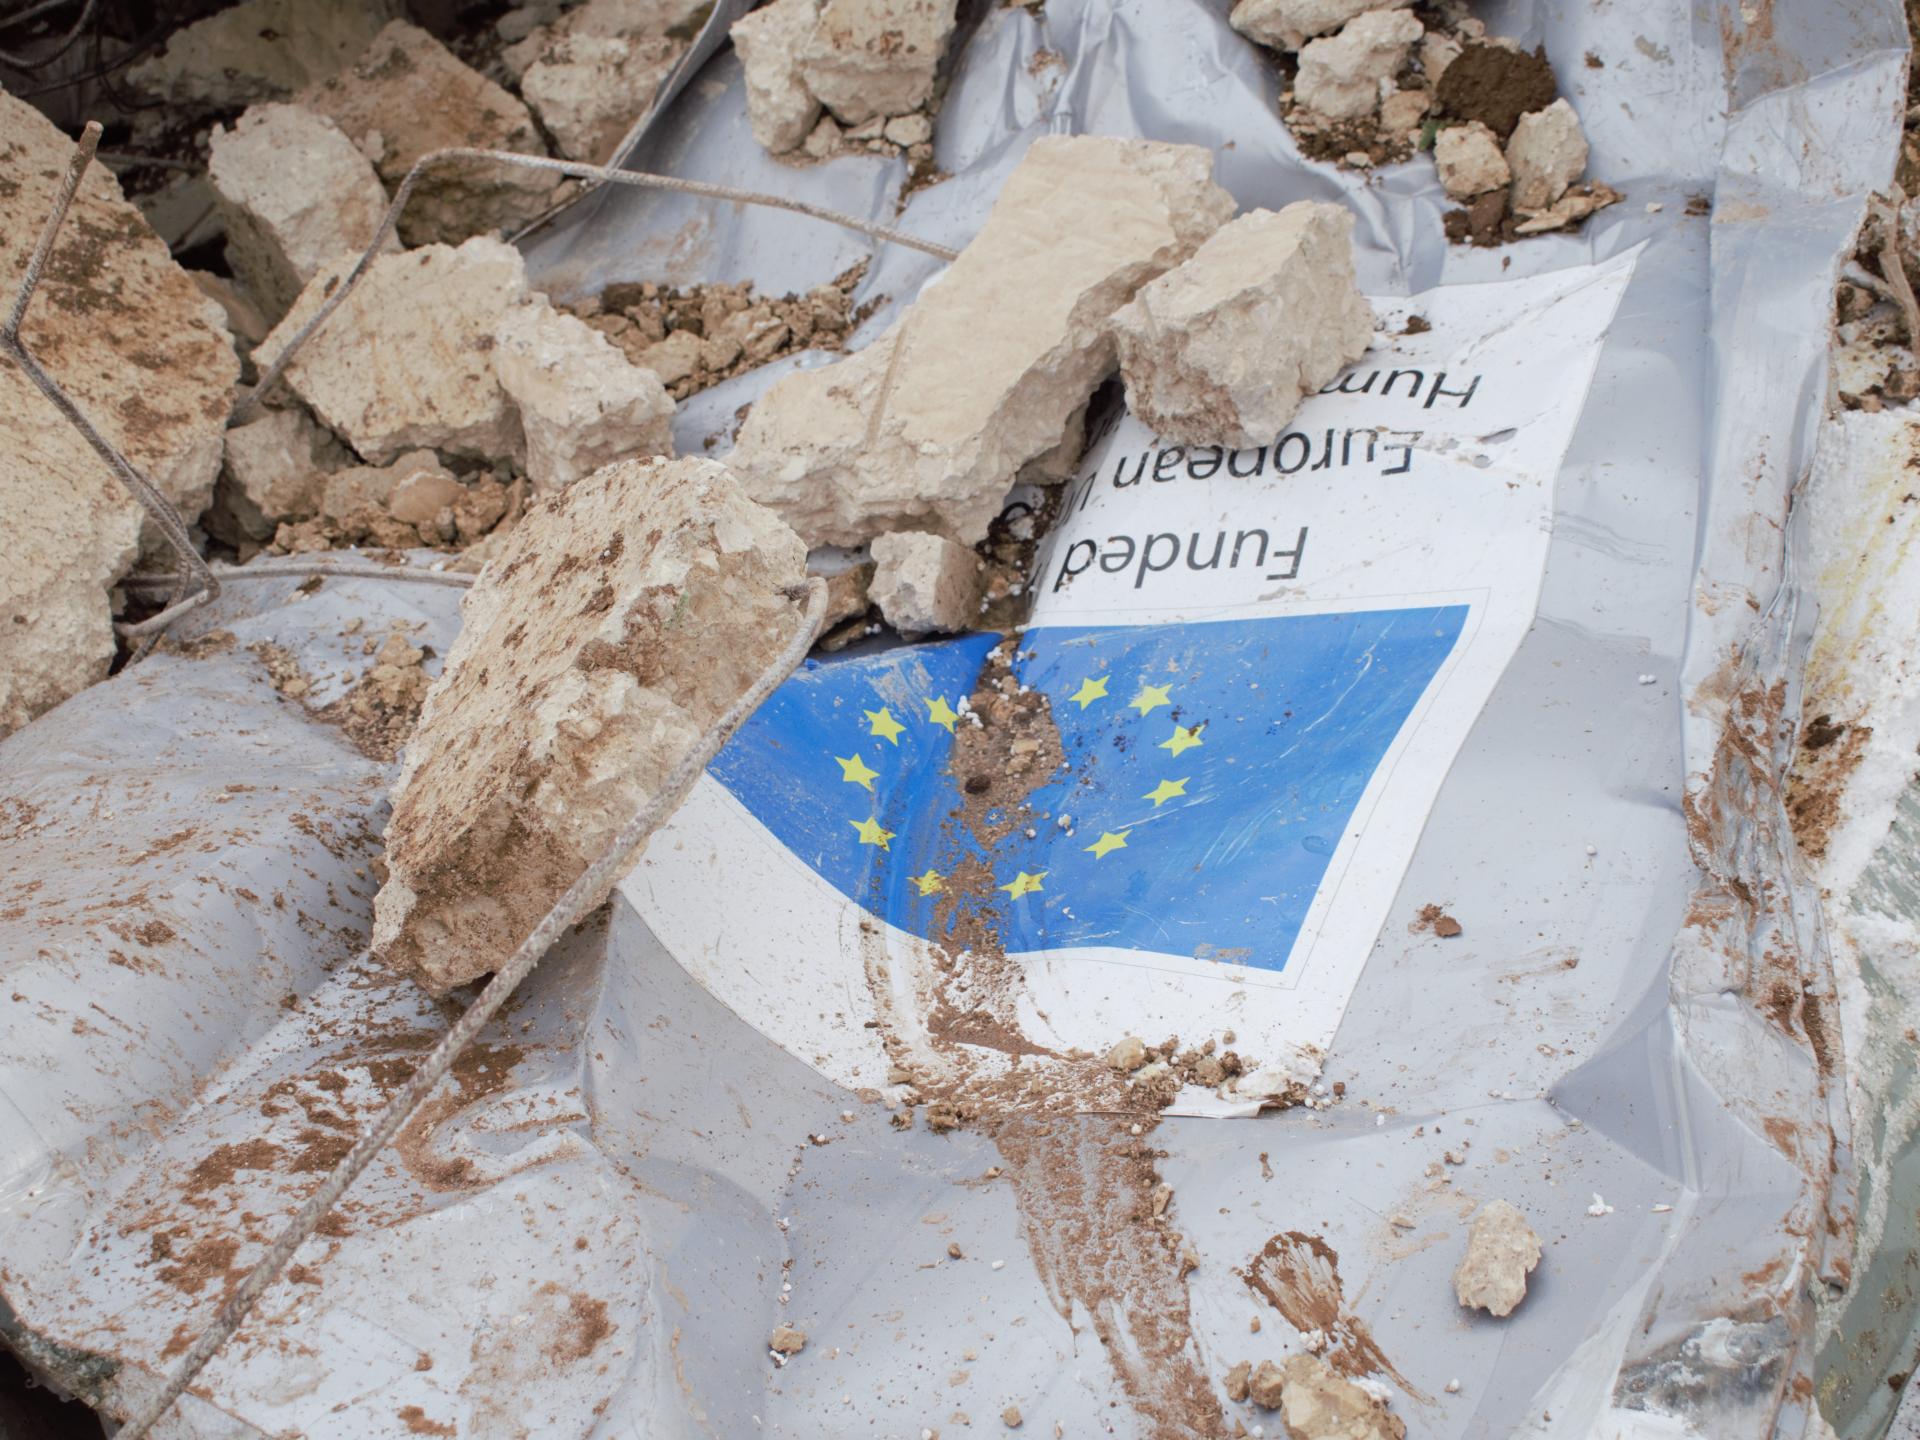 The demolished caravan at Furush Beit Dajan, with the plaque identifying it as a donation by the European Union